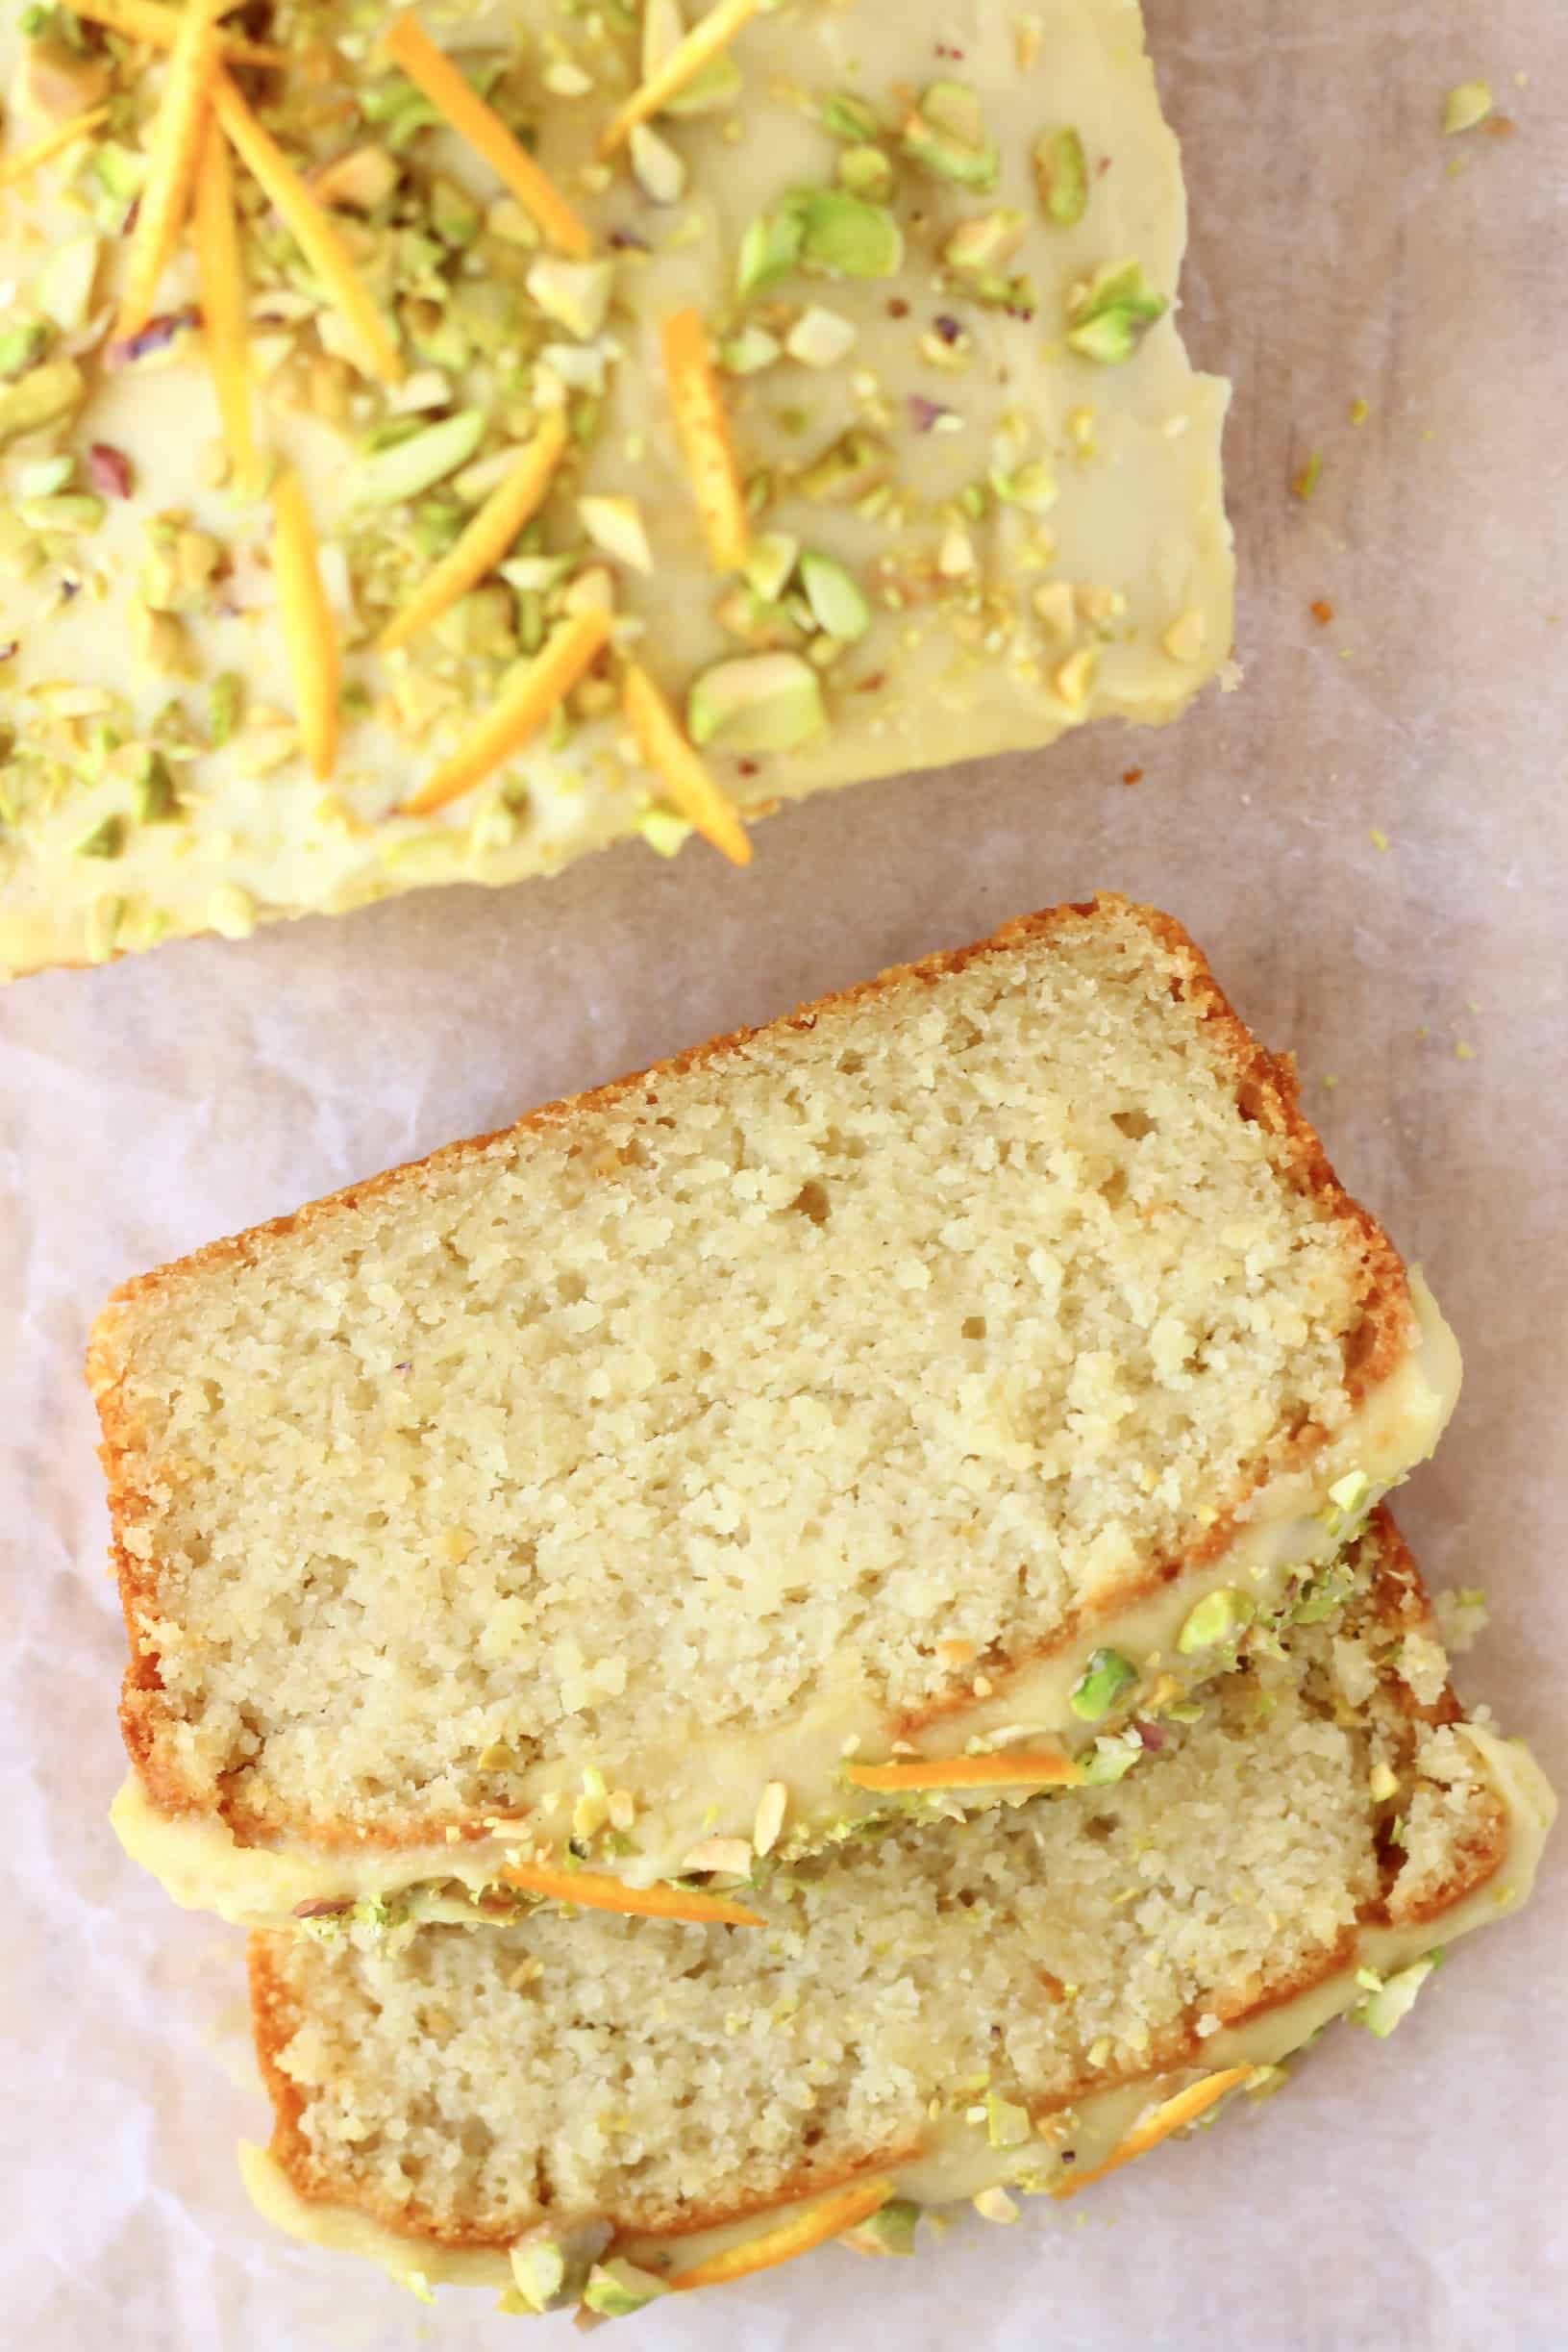 A loaf of vegan orange bread topped with frosting and chopped pistachios with two slices next to it